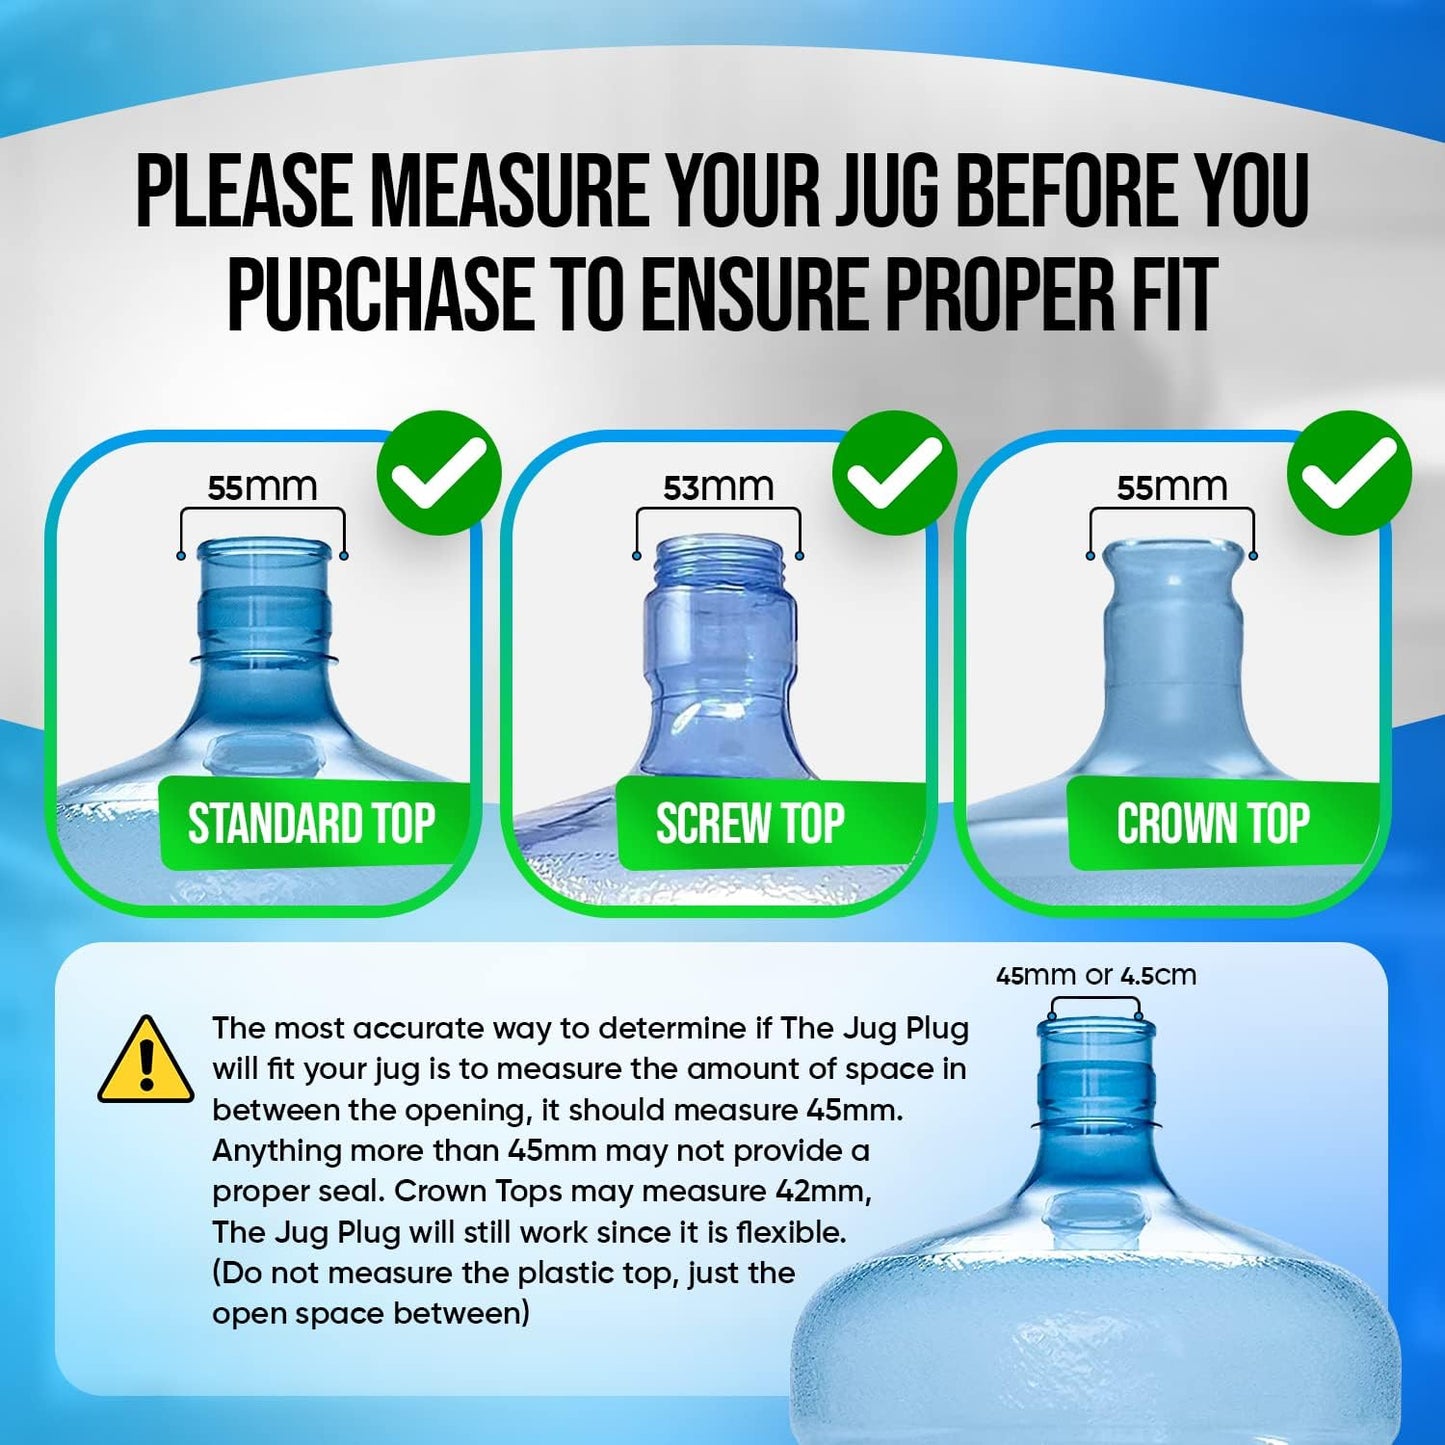 The Jug Plug Original 5 Gallon Water Jug Cap Reusable - No Spill Silicone 3 & 5 Gallon Water Jug Lid Fits 55Mm Bottles - Easy-To-Use, Leak-Proof 3 & 5 Gal Water Jug Cap Replacement Cover - 3 Pack